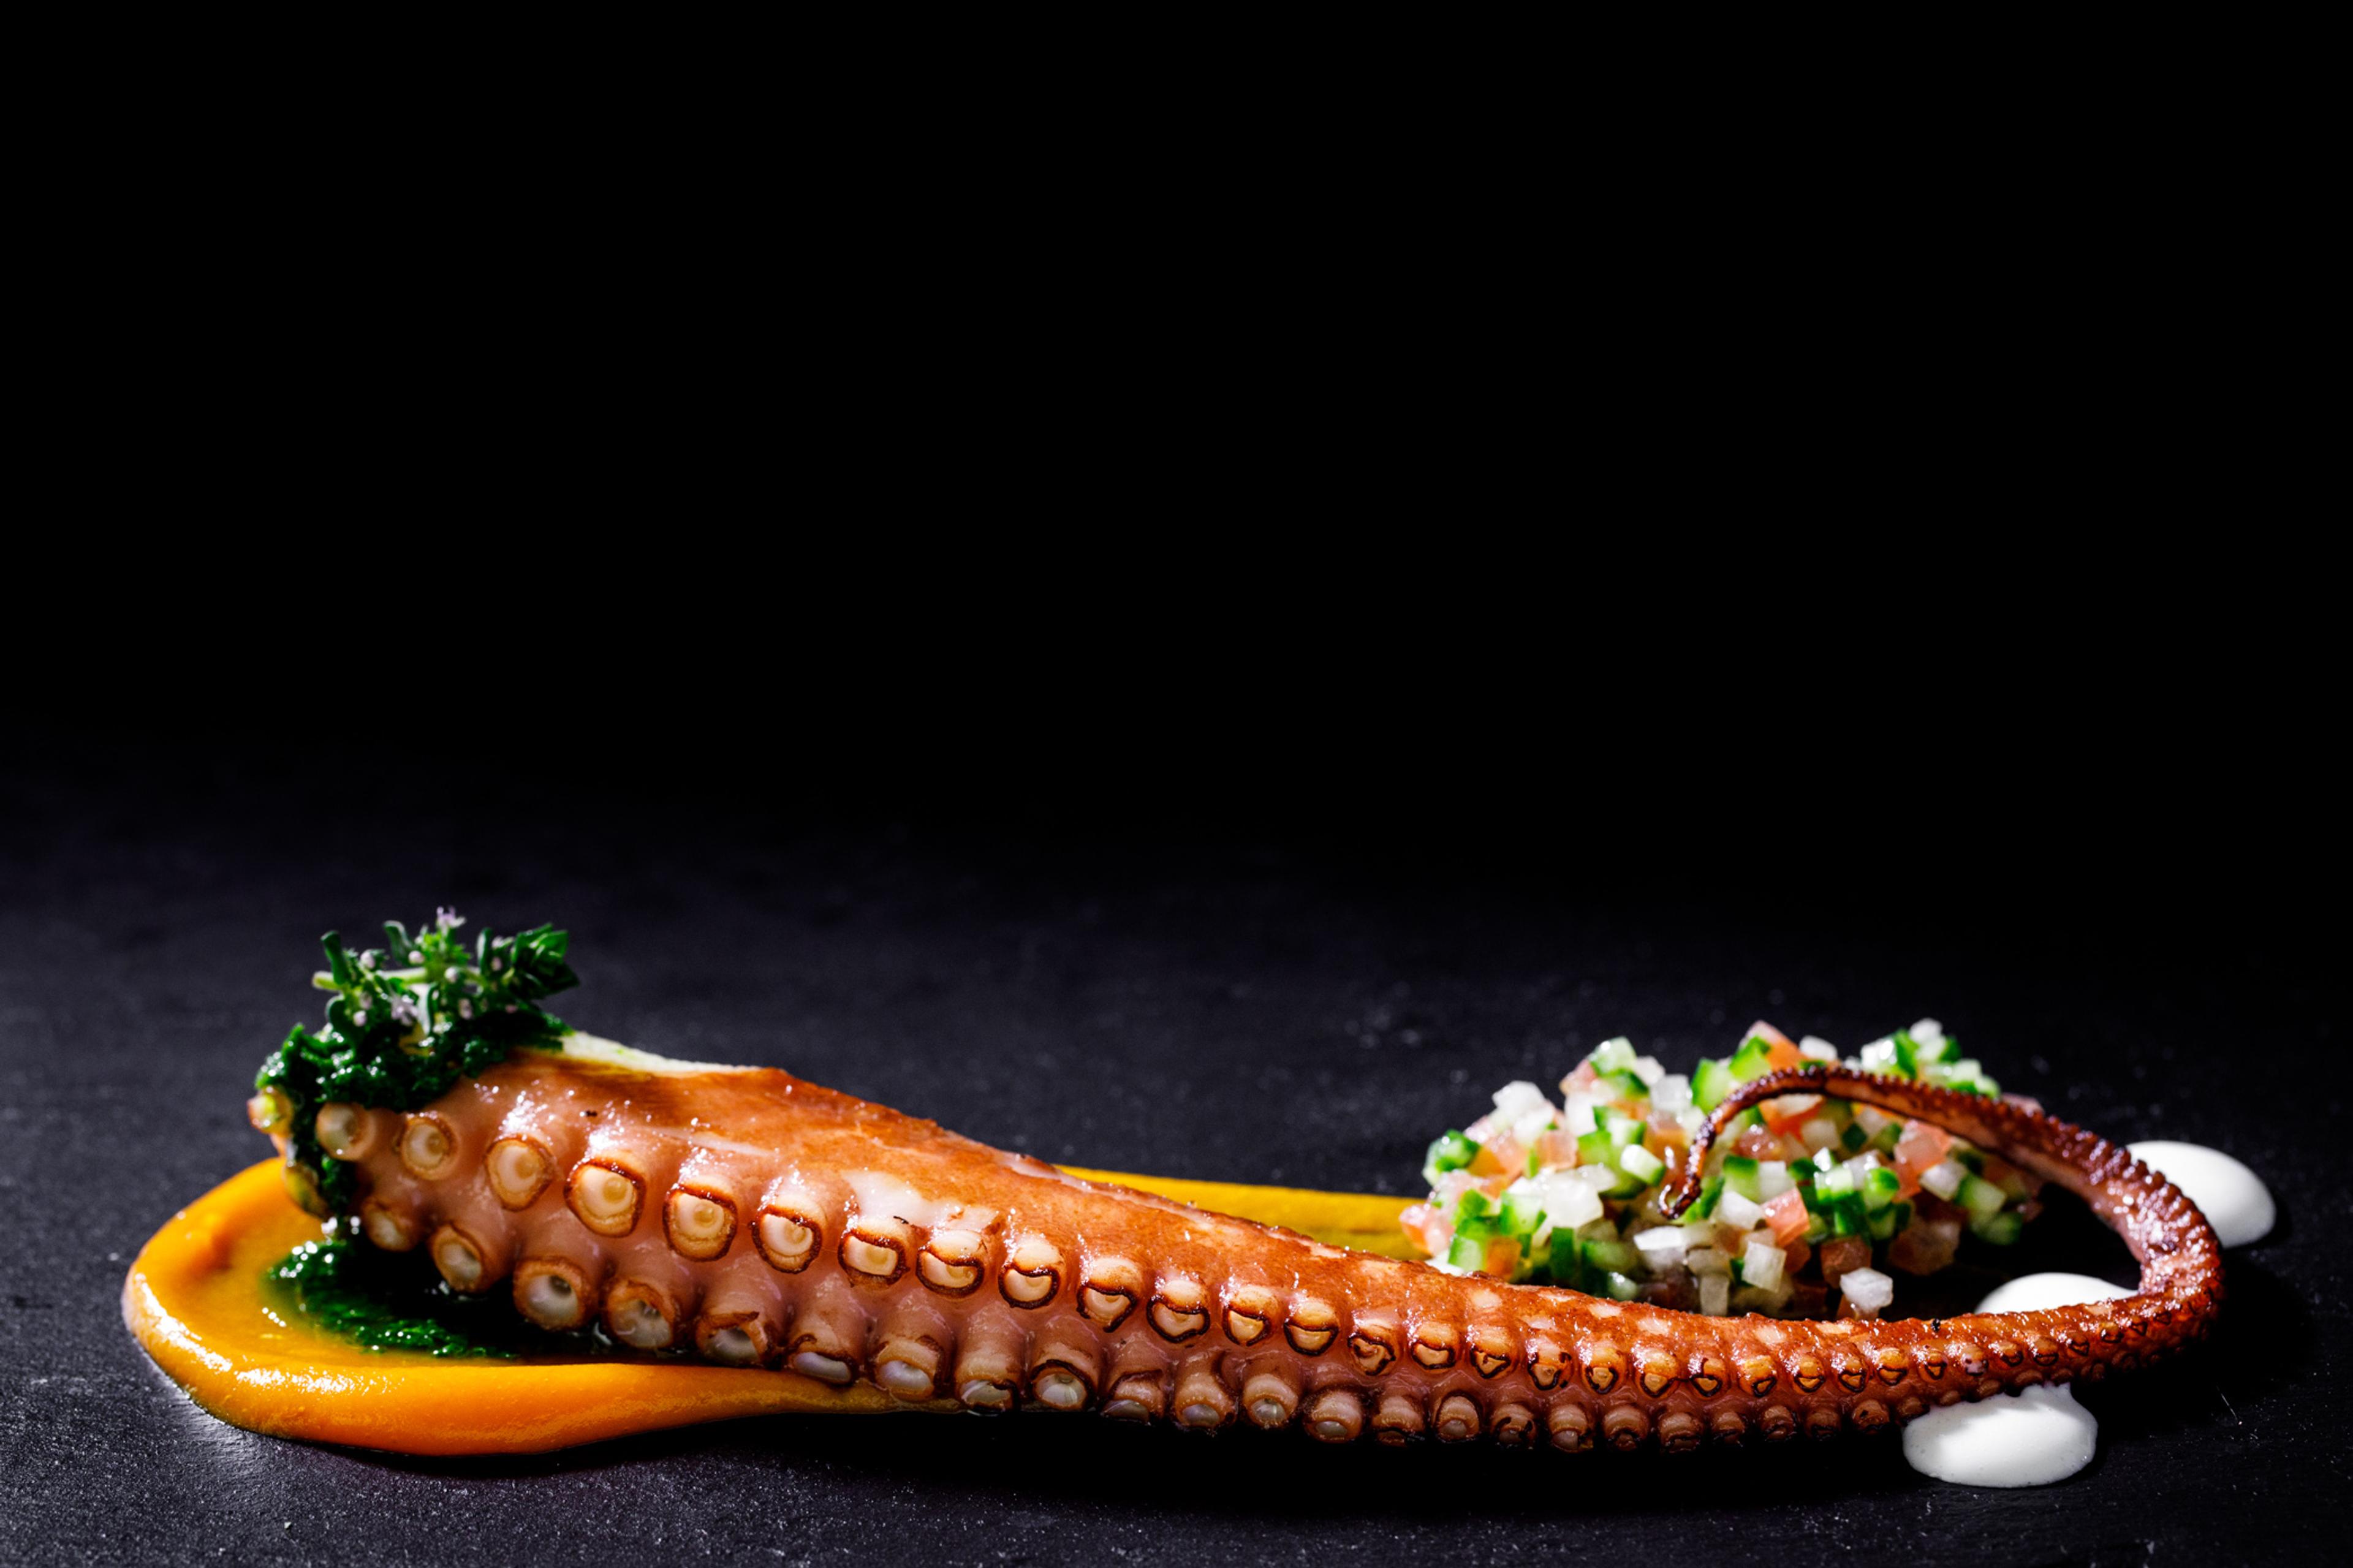 Octopus tentacle with garnish and sauce.